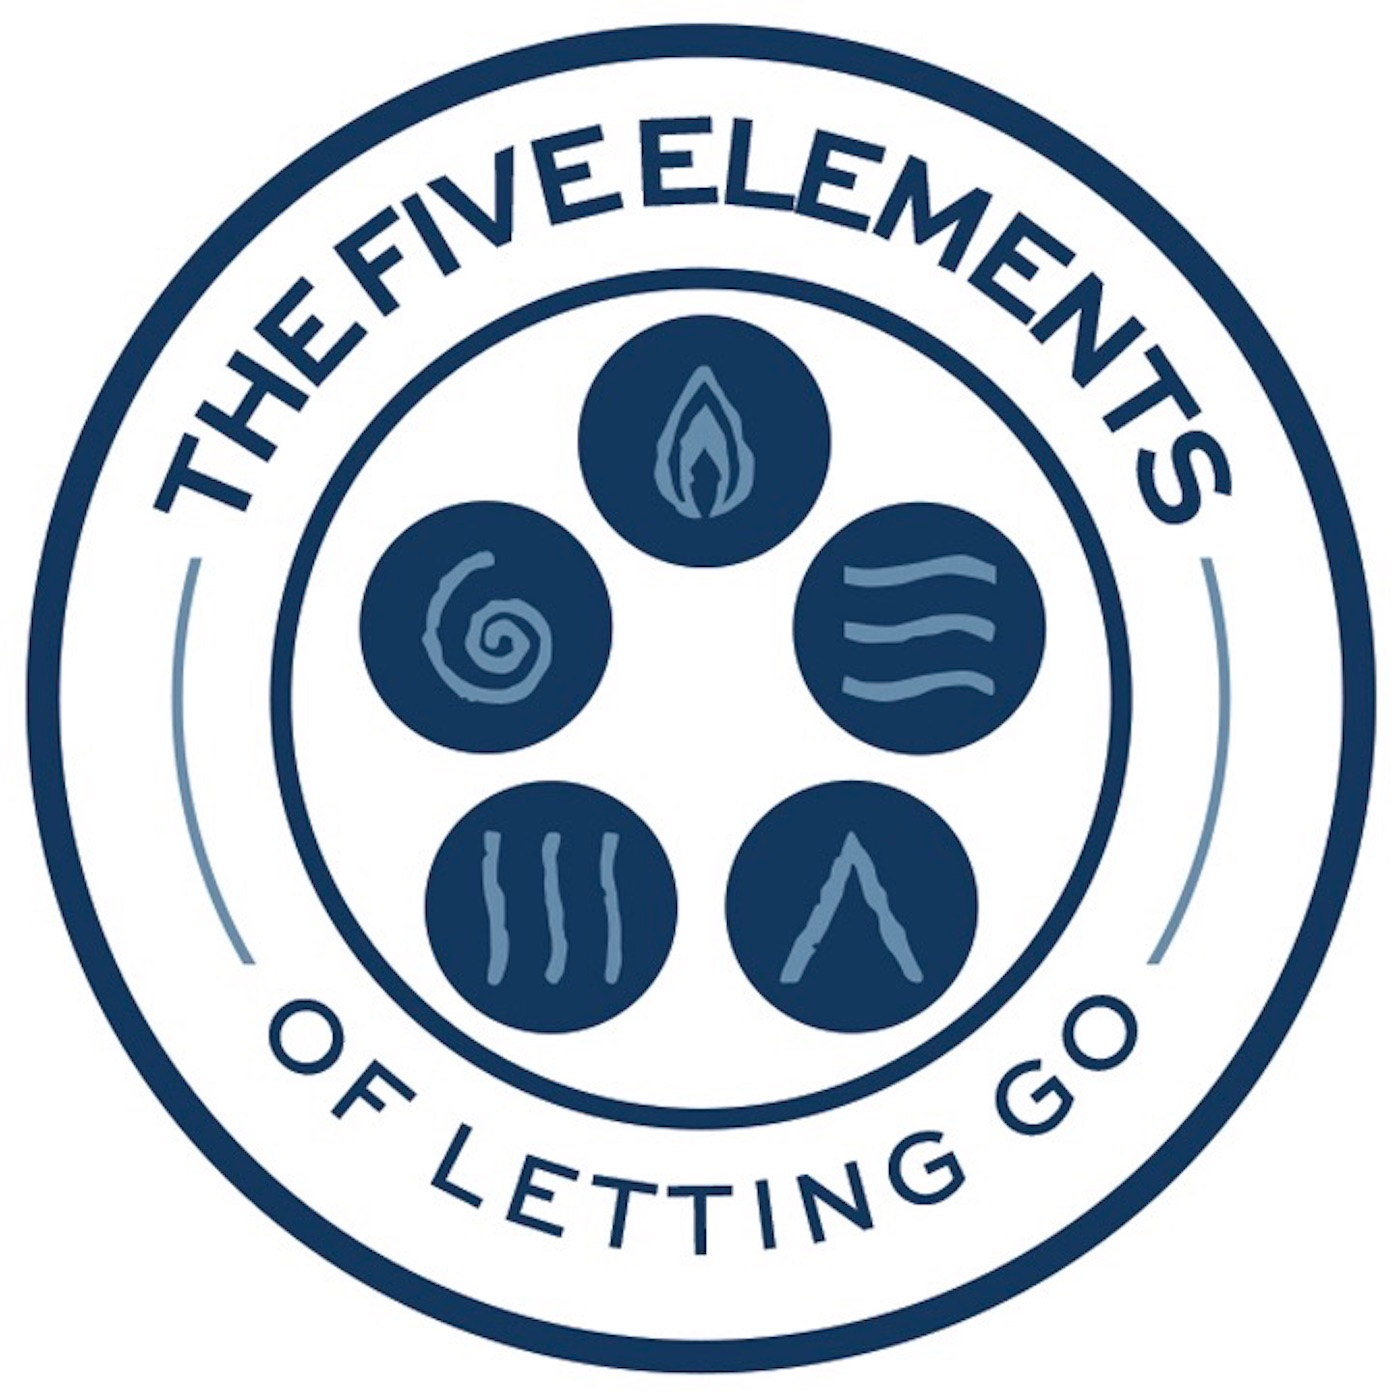 The Five Elements of Letting Go